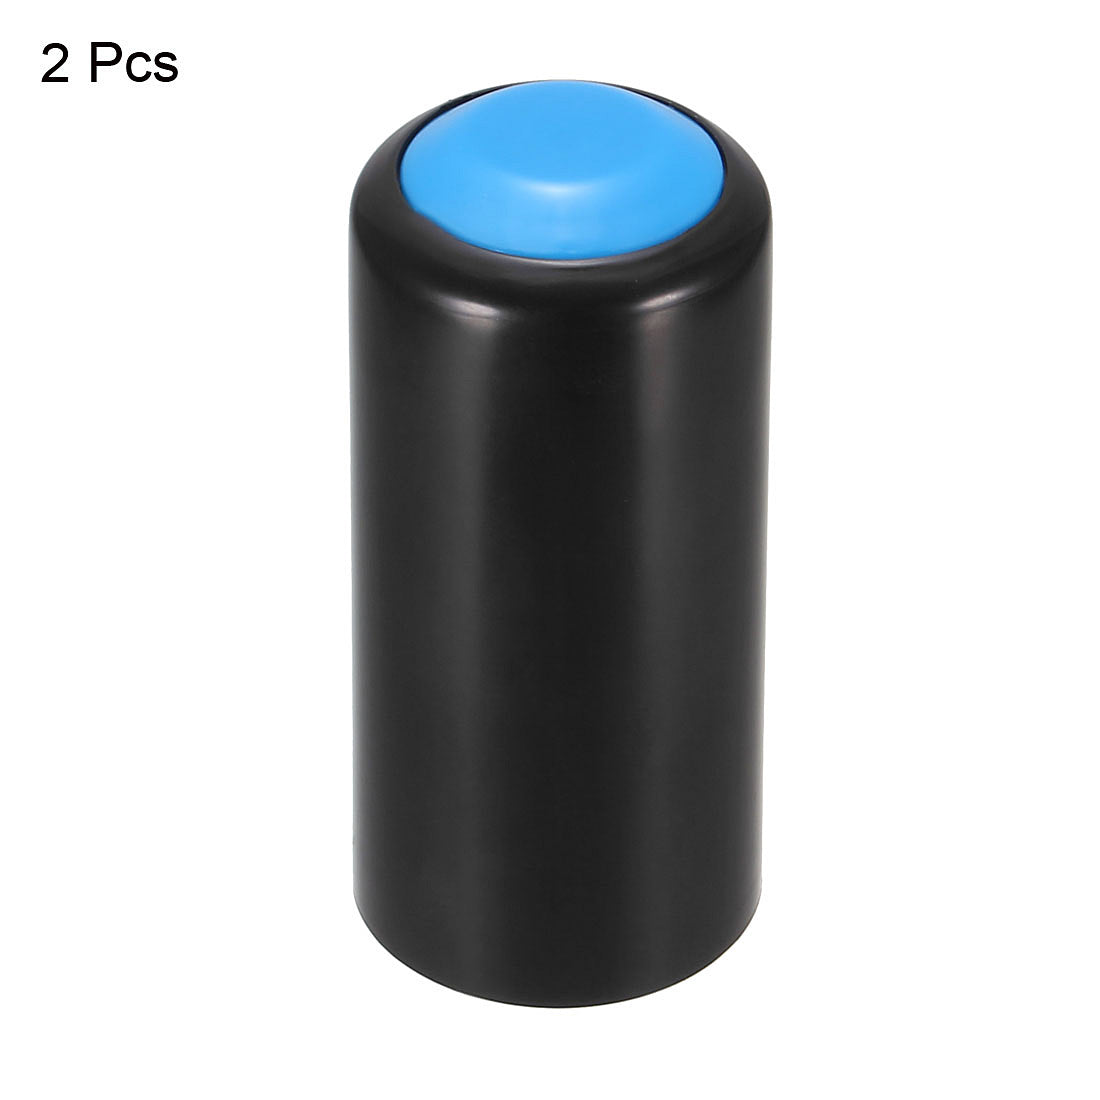 uxcell Uxcell Battery Cover Mic Battery Screw on Cap Cup Cover for PGX24 SLX24 PG58 SM58 BETA58 Wireless 2Pcs